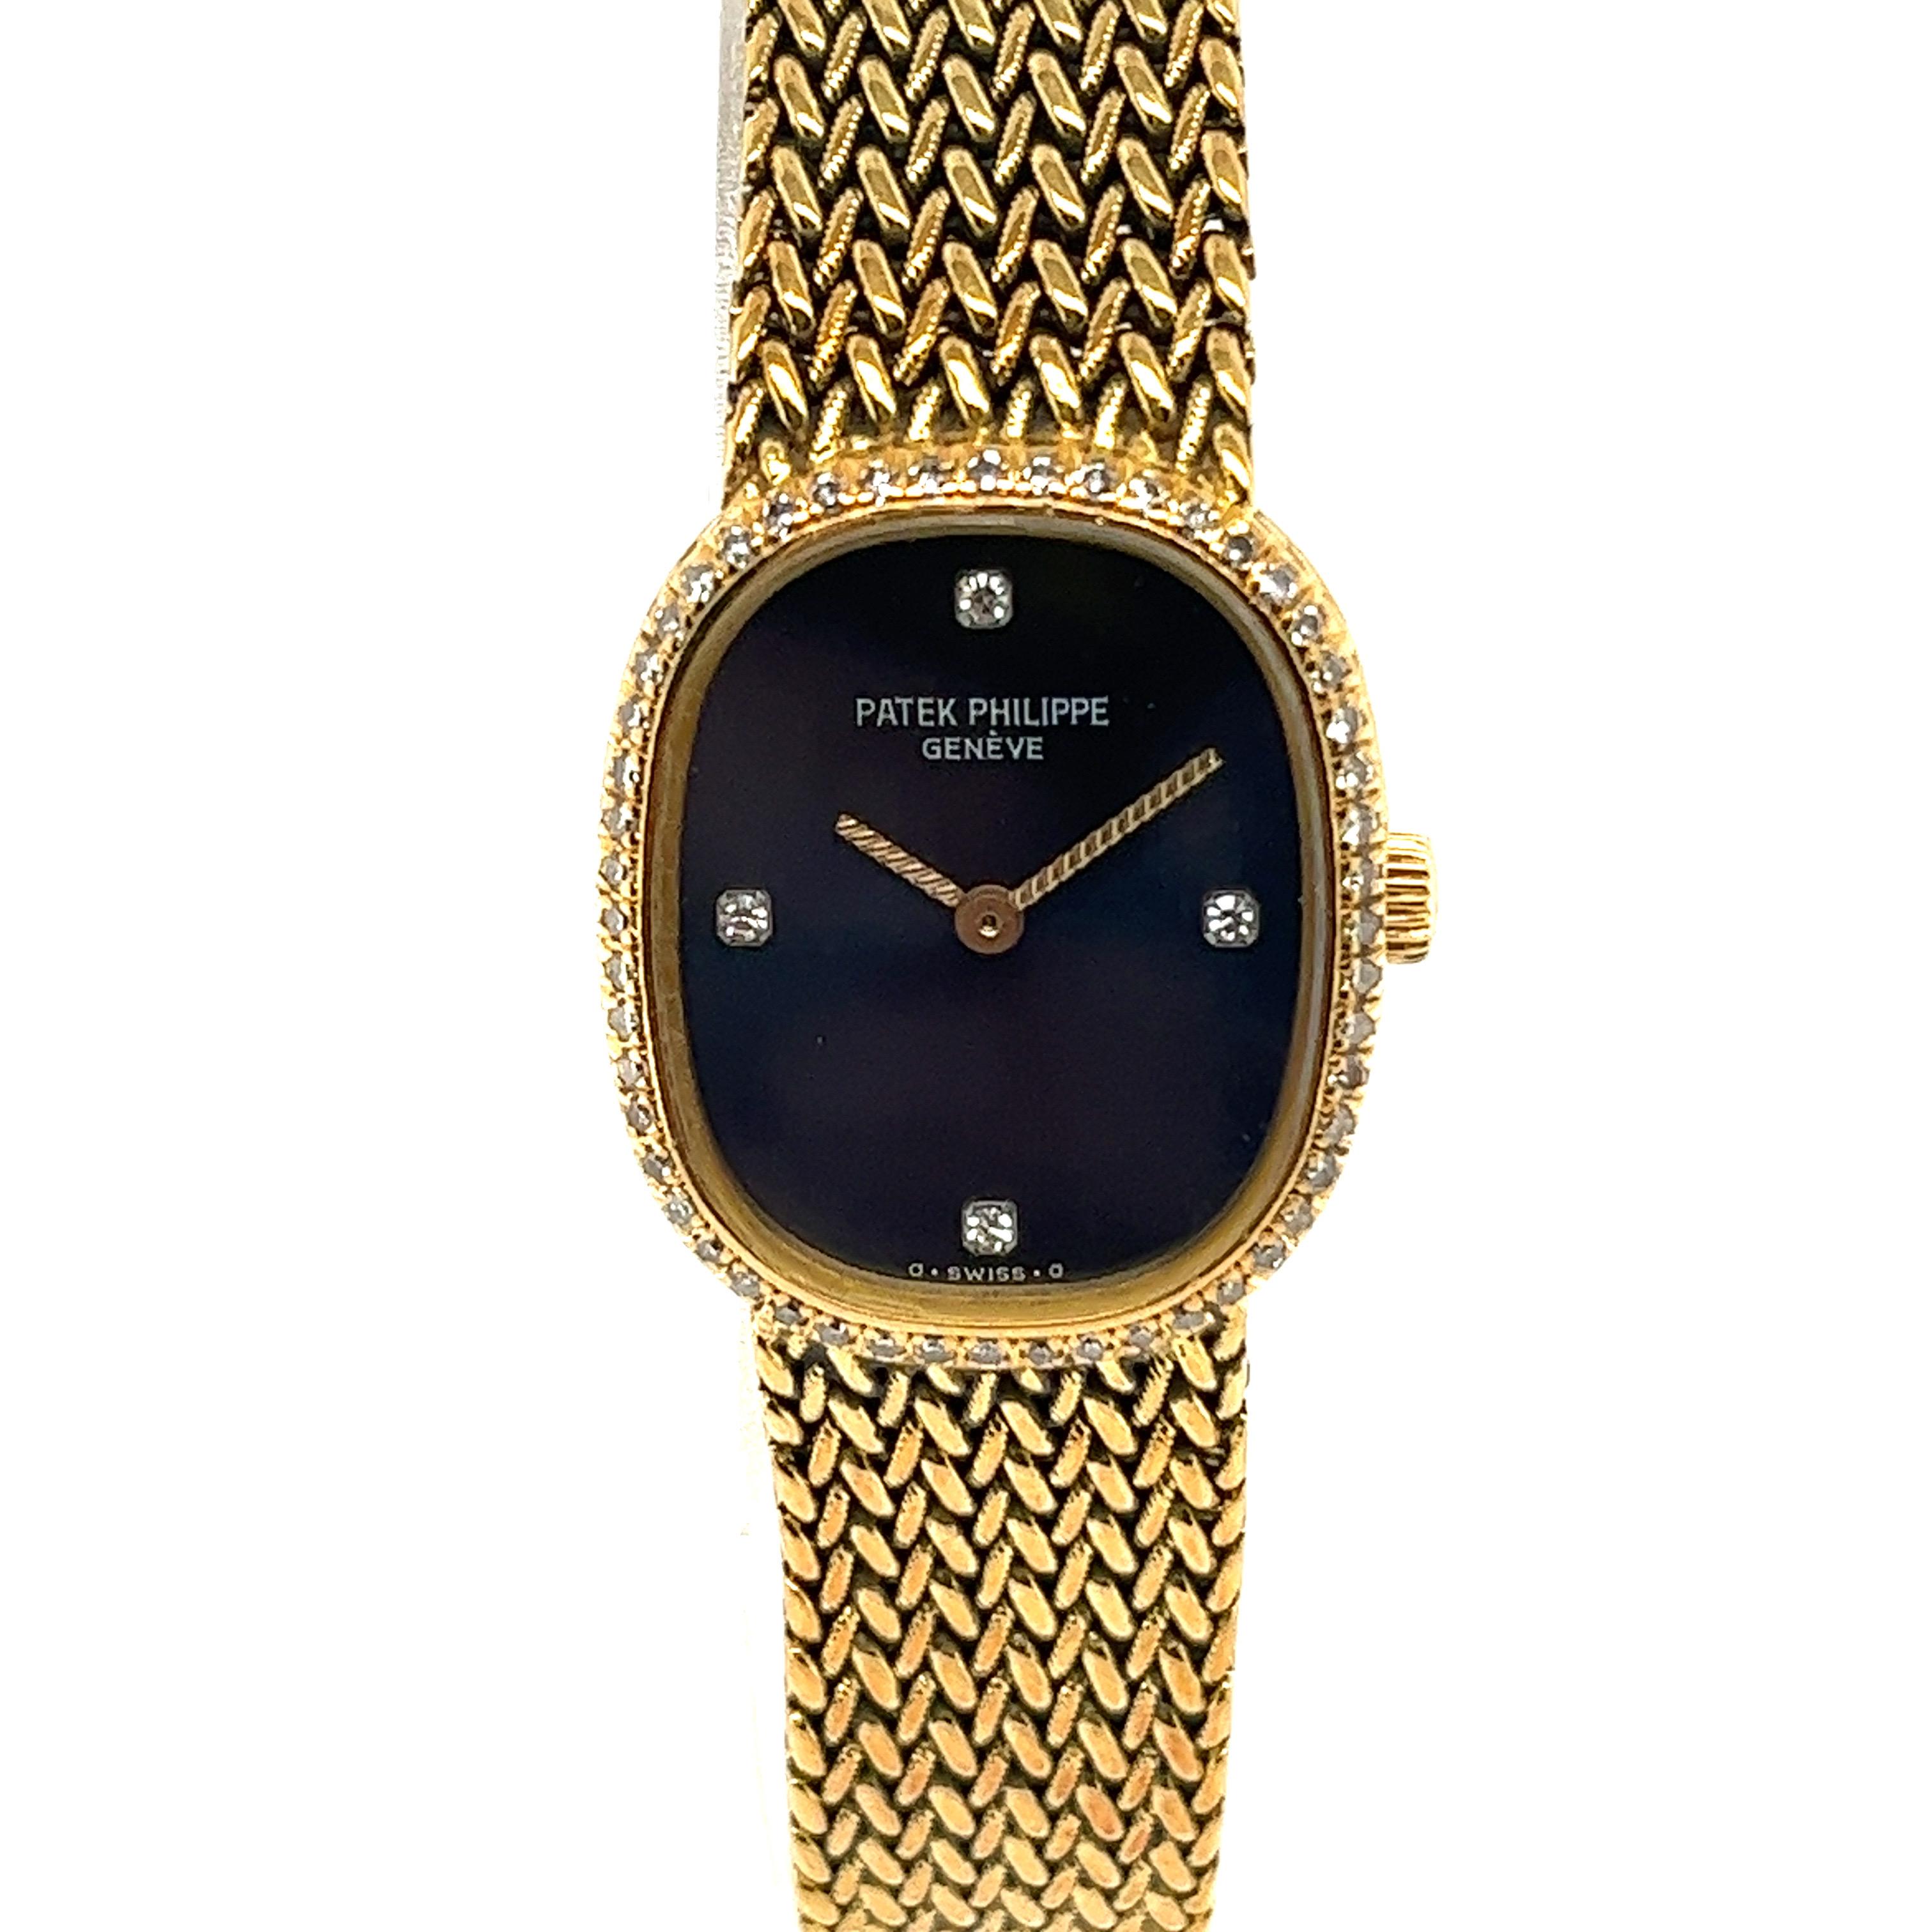 Ladies 18k yellow gold Patek Phillips Ellipse 4498. This stunning pre-owned  watch is crafted of 18k yellow gold with a black face, gold hands and diamonds at the 12, 3, 6 & 9 positions. The band is made of woven 18k gold and it has a gold folding